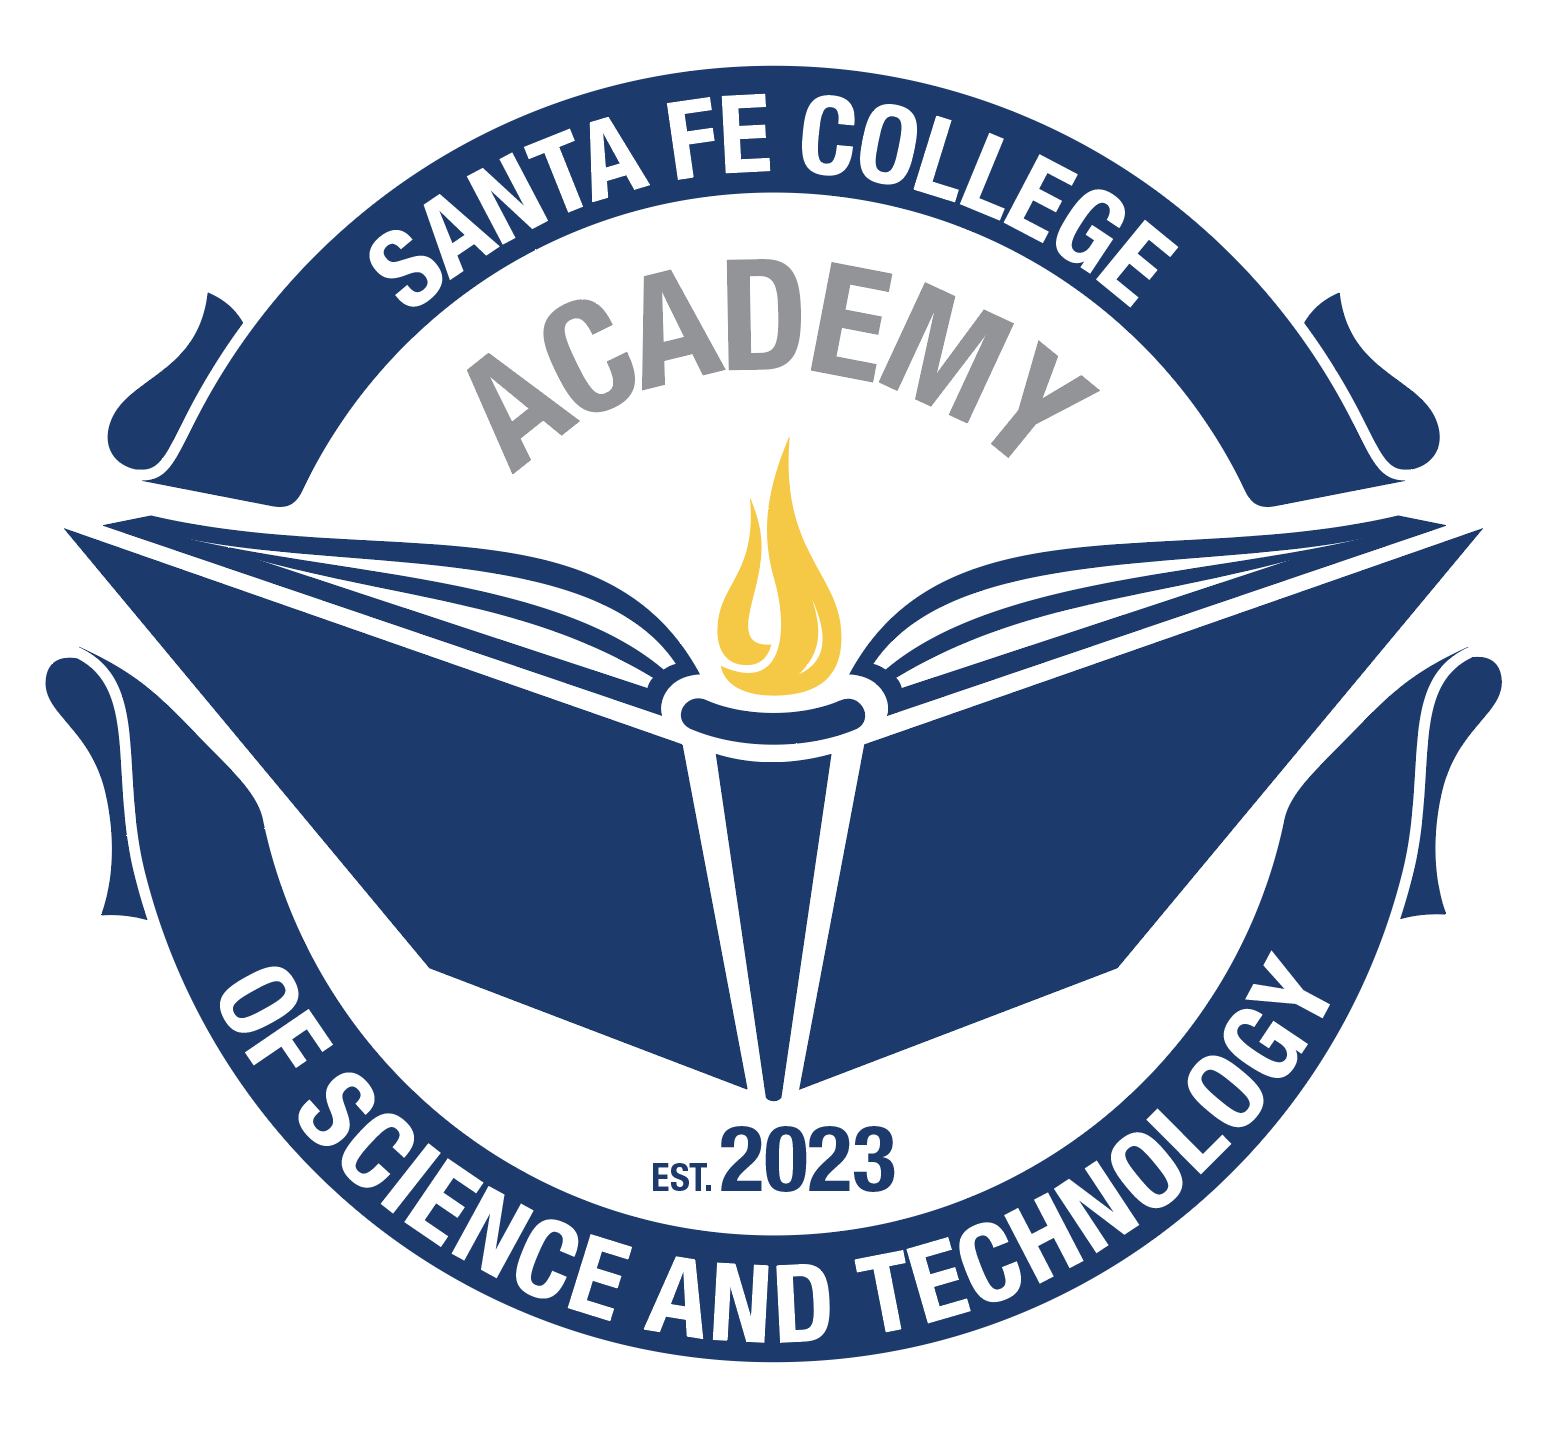 Santa Fe College Academy of Science and Technology logo